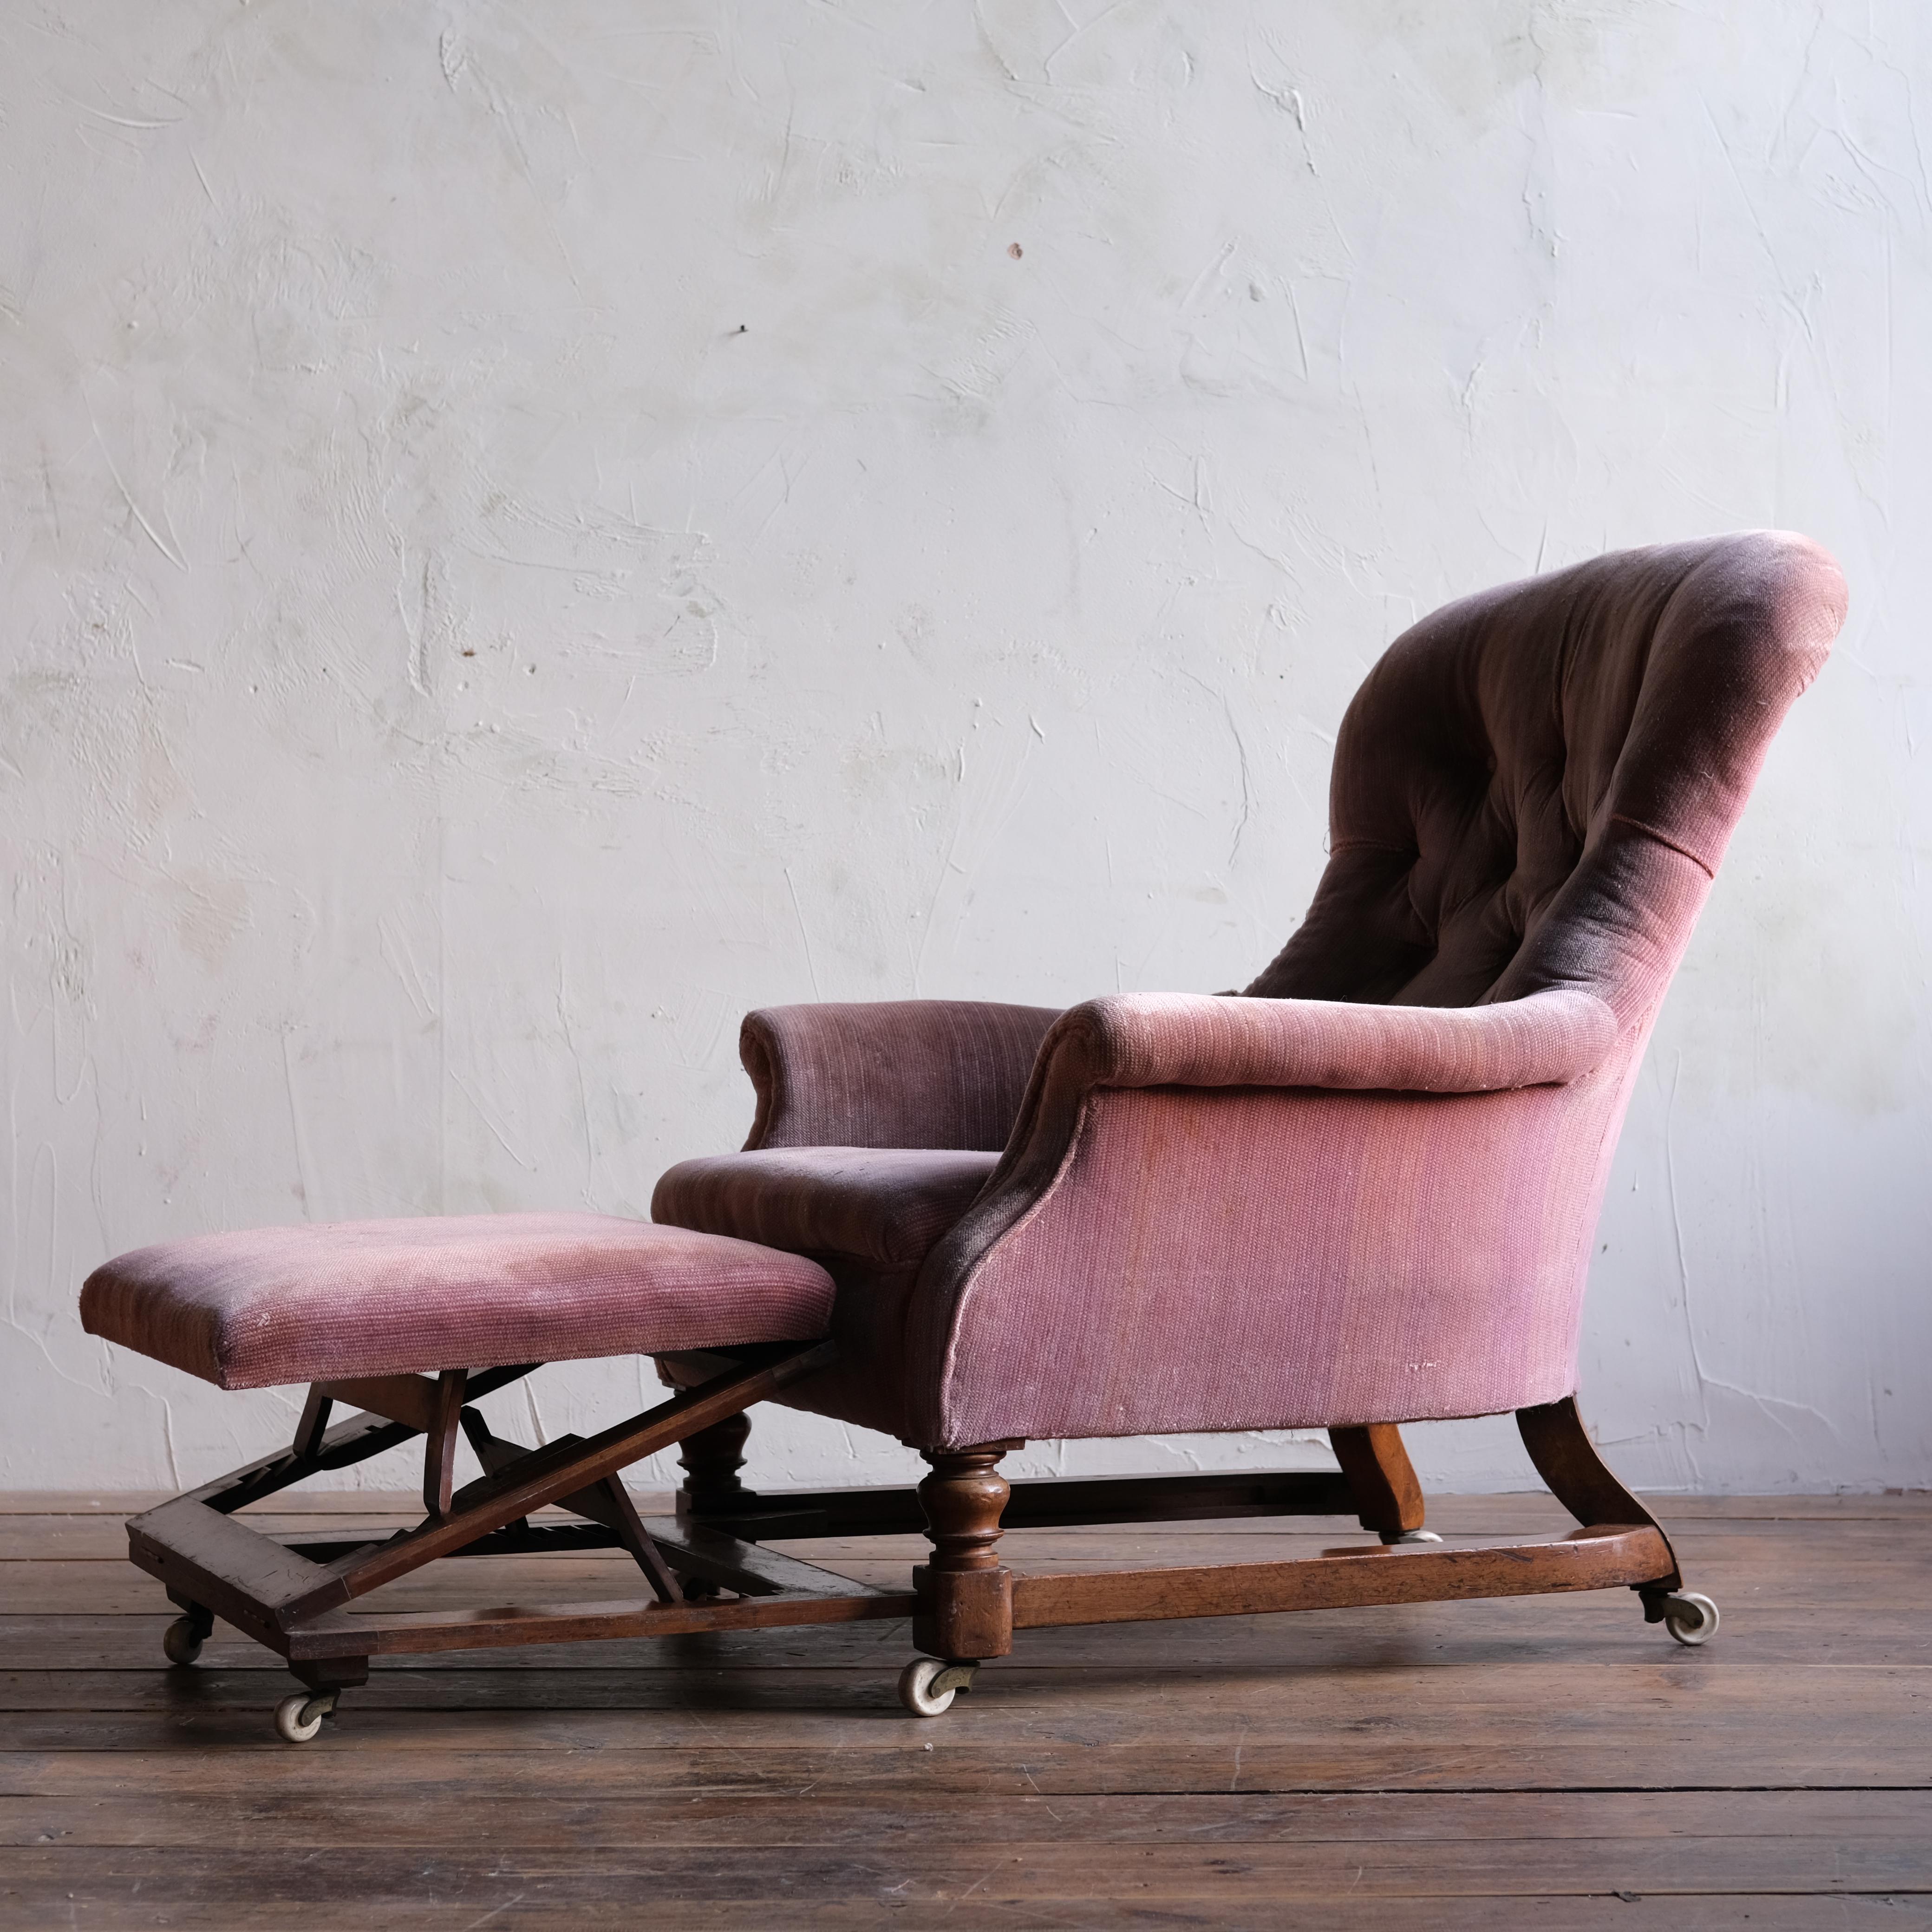 19th century gout armchair by T. H. Filmer & sons. The Walnut base raised on large ceramic Cope & Collinson casters and its original pull-out adjustable gout stool. A very comfortable chair just in need of upholstery

 

80cm wide

95cm deep

94cm